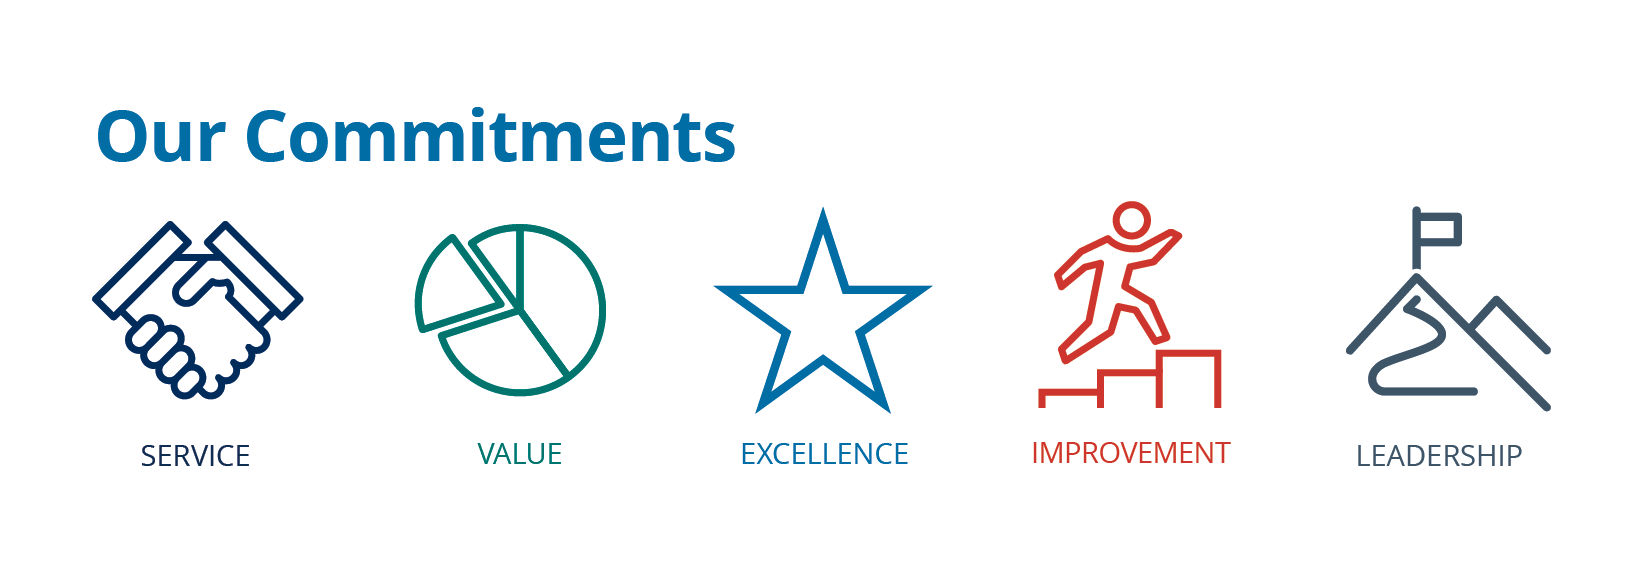 Image featuring Capital Region BOCES' Commitments in words and icons. These are: Service, two hands holding in navy blue, Value, a pie chart in green, Excellence, a star in bright blue, Improvement, a person climbing stairs in red, and Leadership, a mountain with a path leading to a flag on its top in grey.